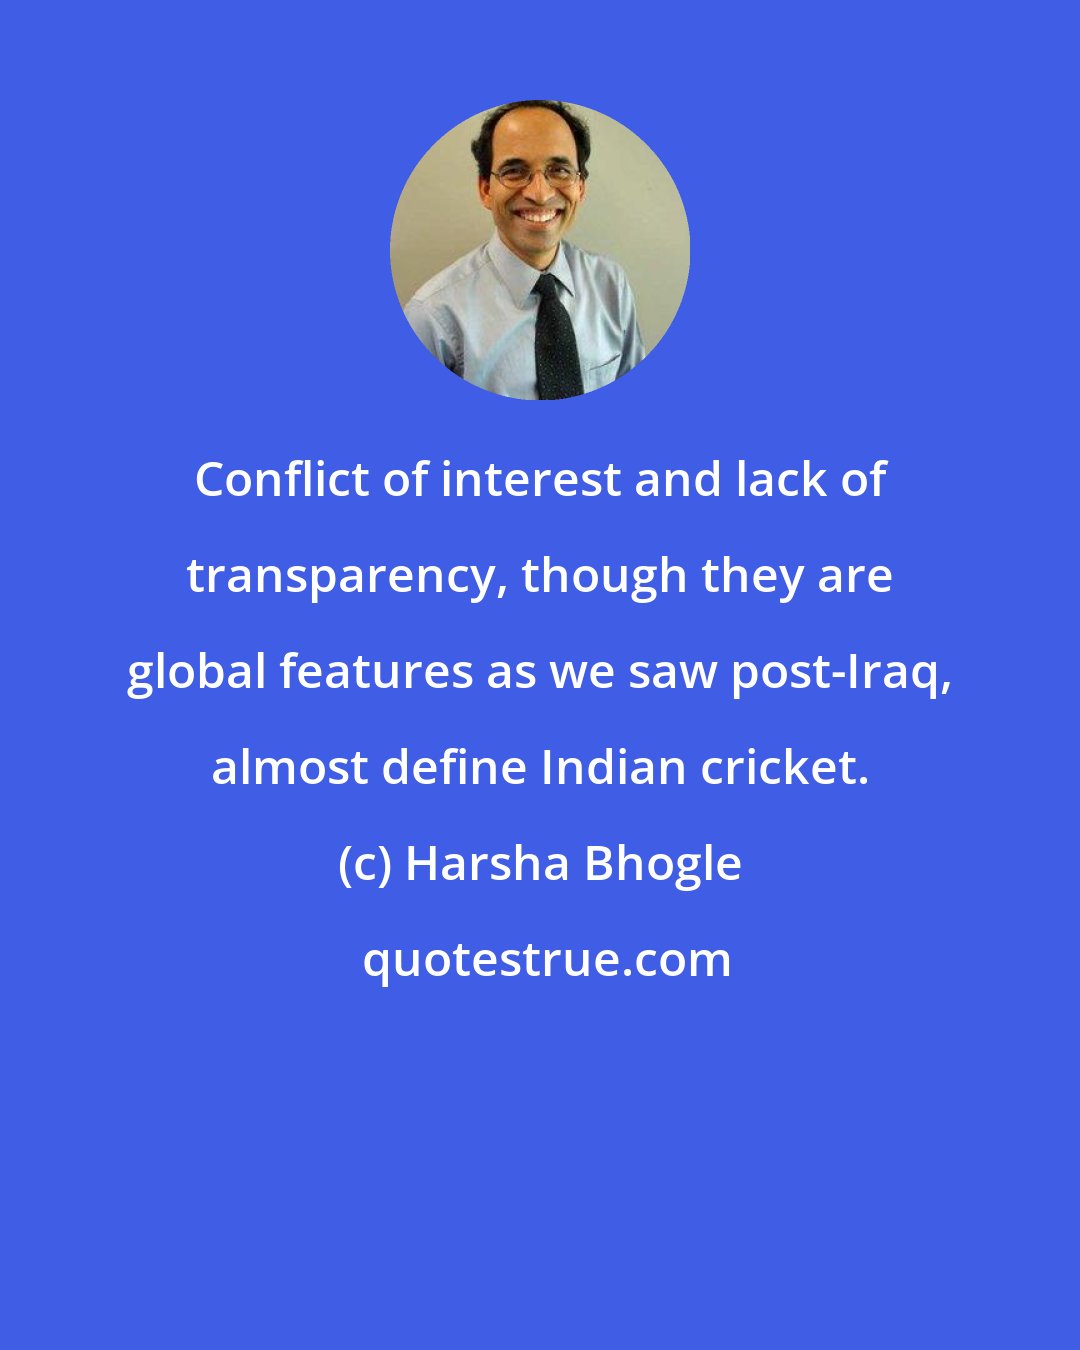 Harsha Bhogle: Conflict of interest and lack of transparency, though they are global features as we saw post-Iraq, almost define Indian cricket.